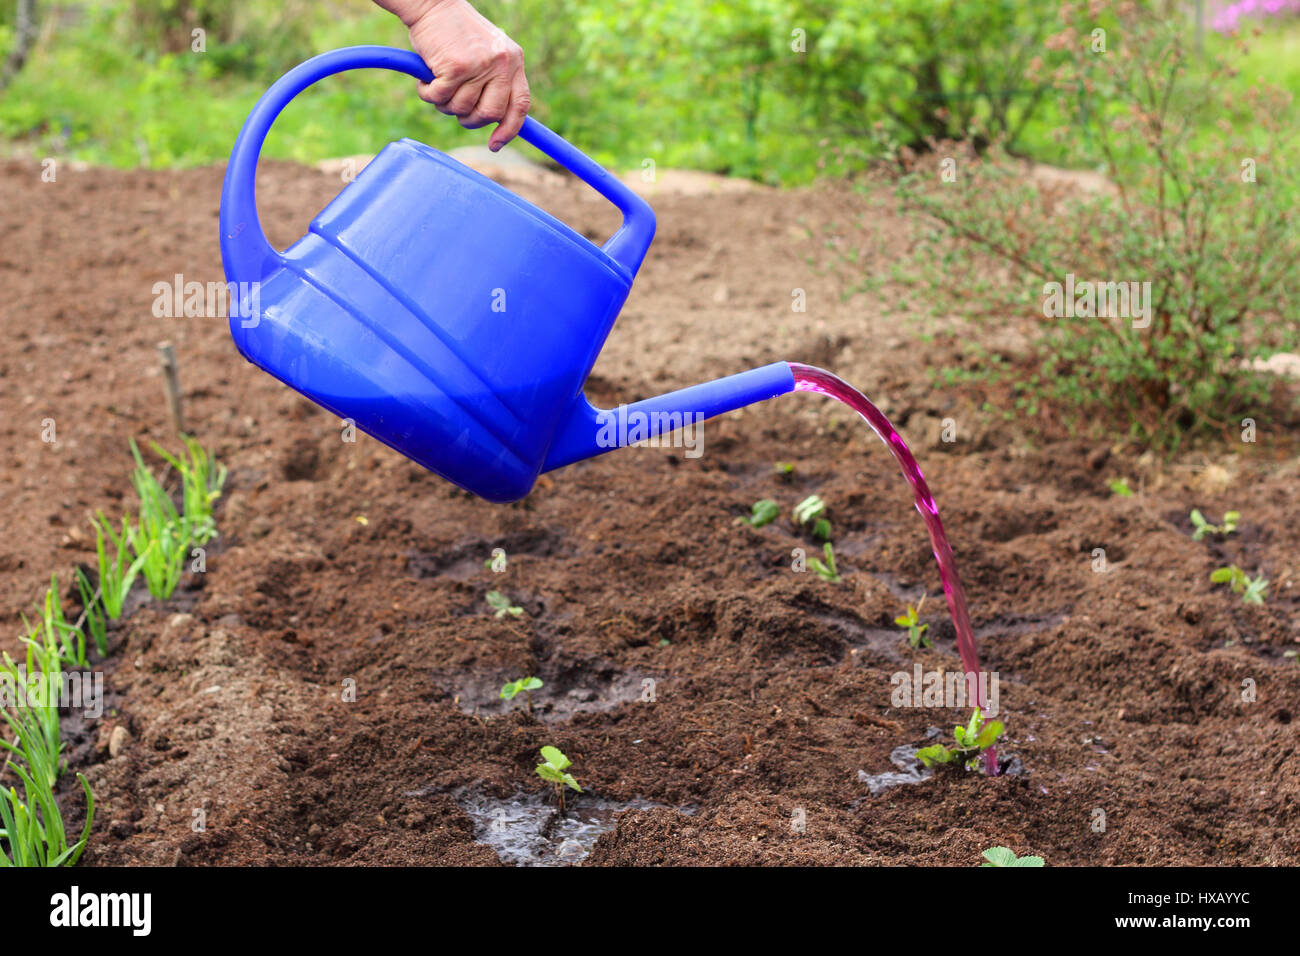 Watering strawberry plants seedlings from watering can with mineral fertilizer Stock Photo